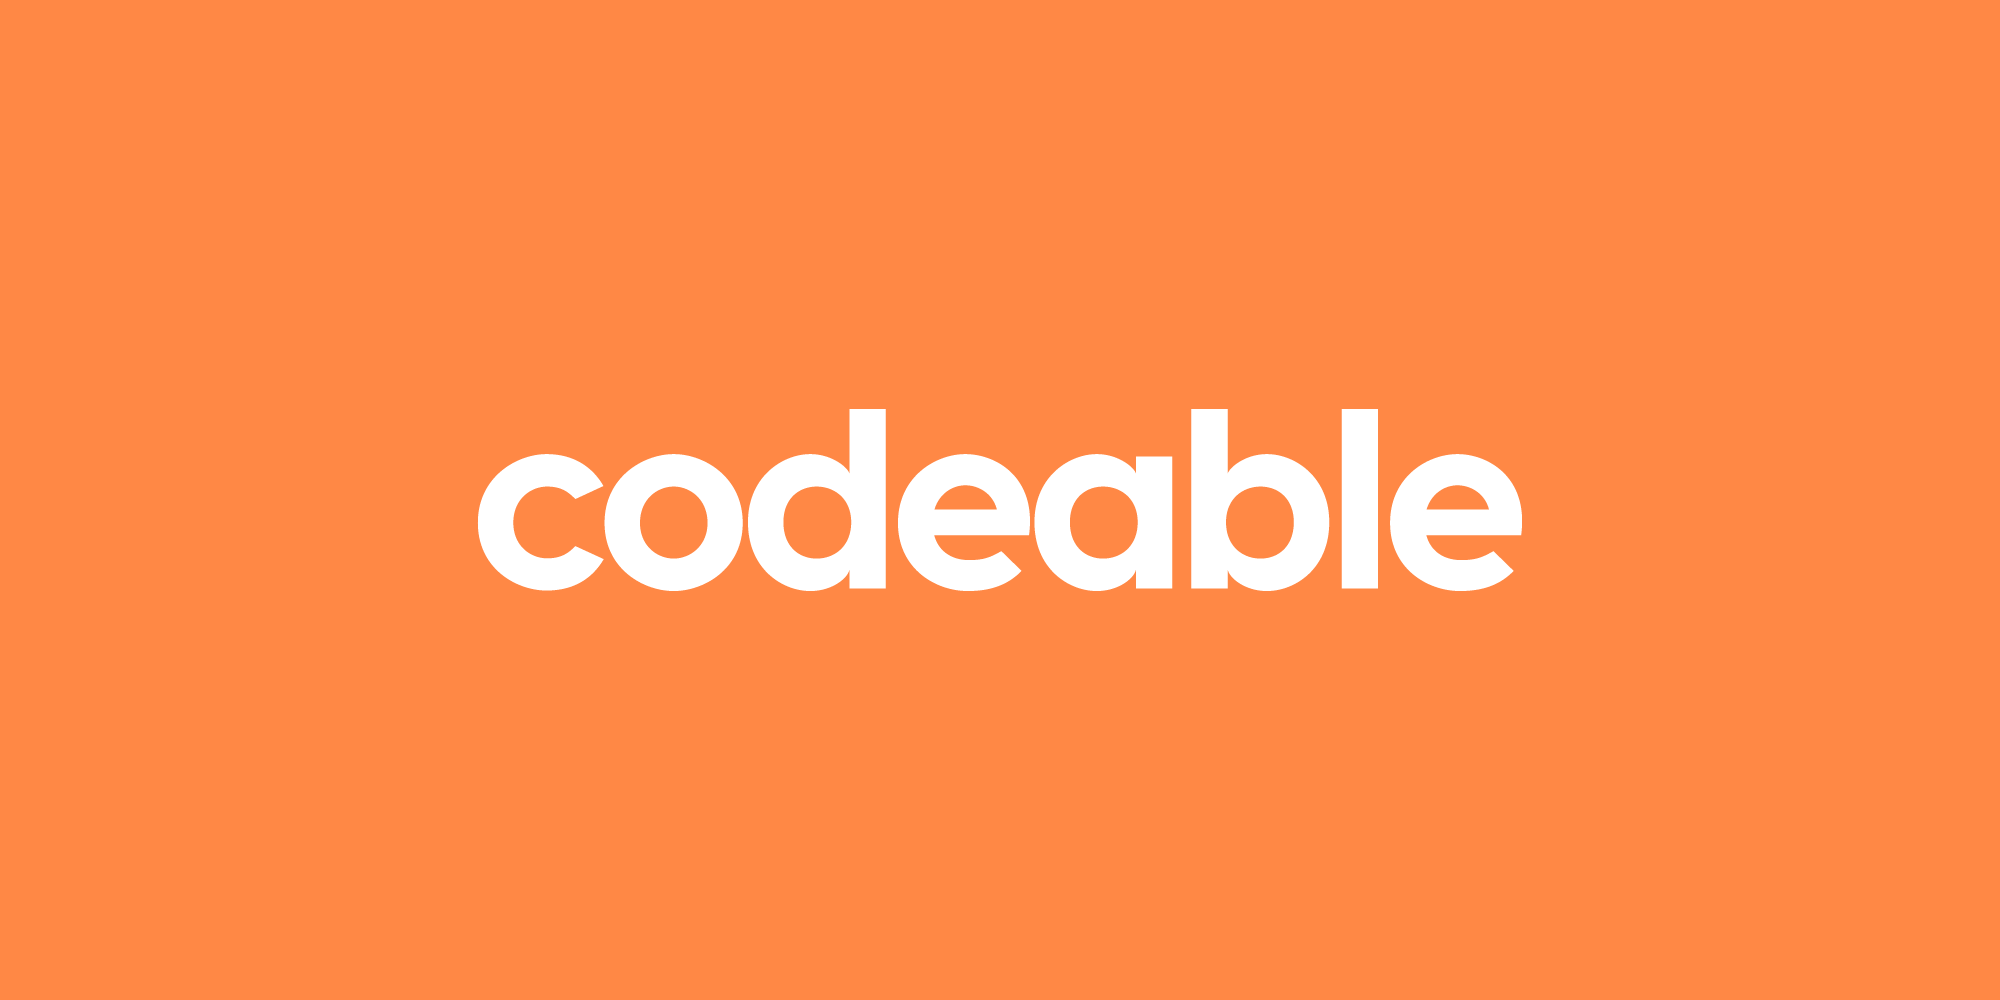 Codeable-logo-featured-image